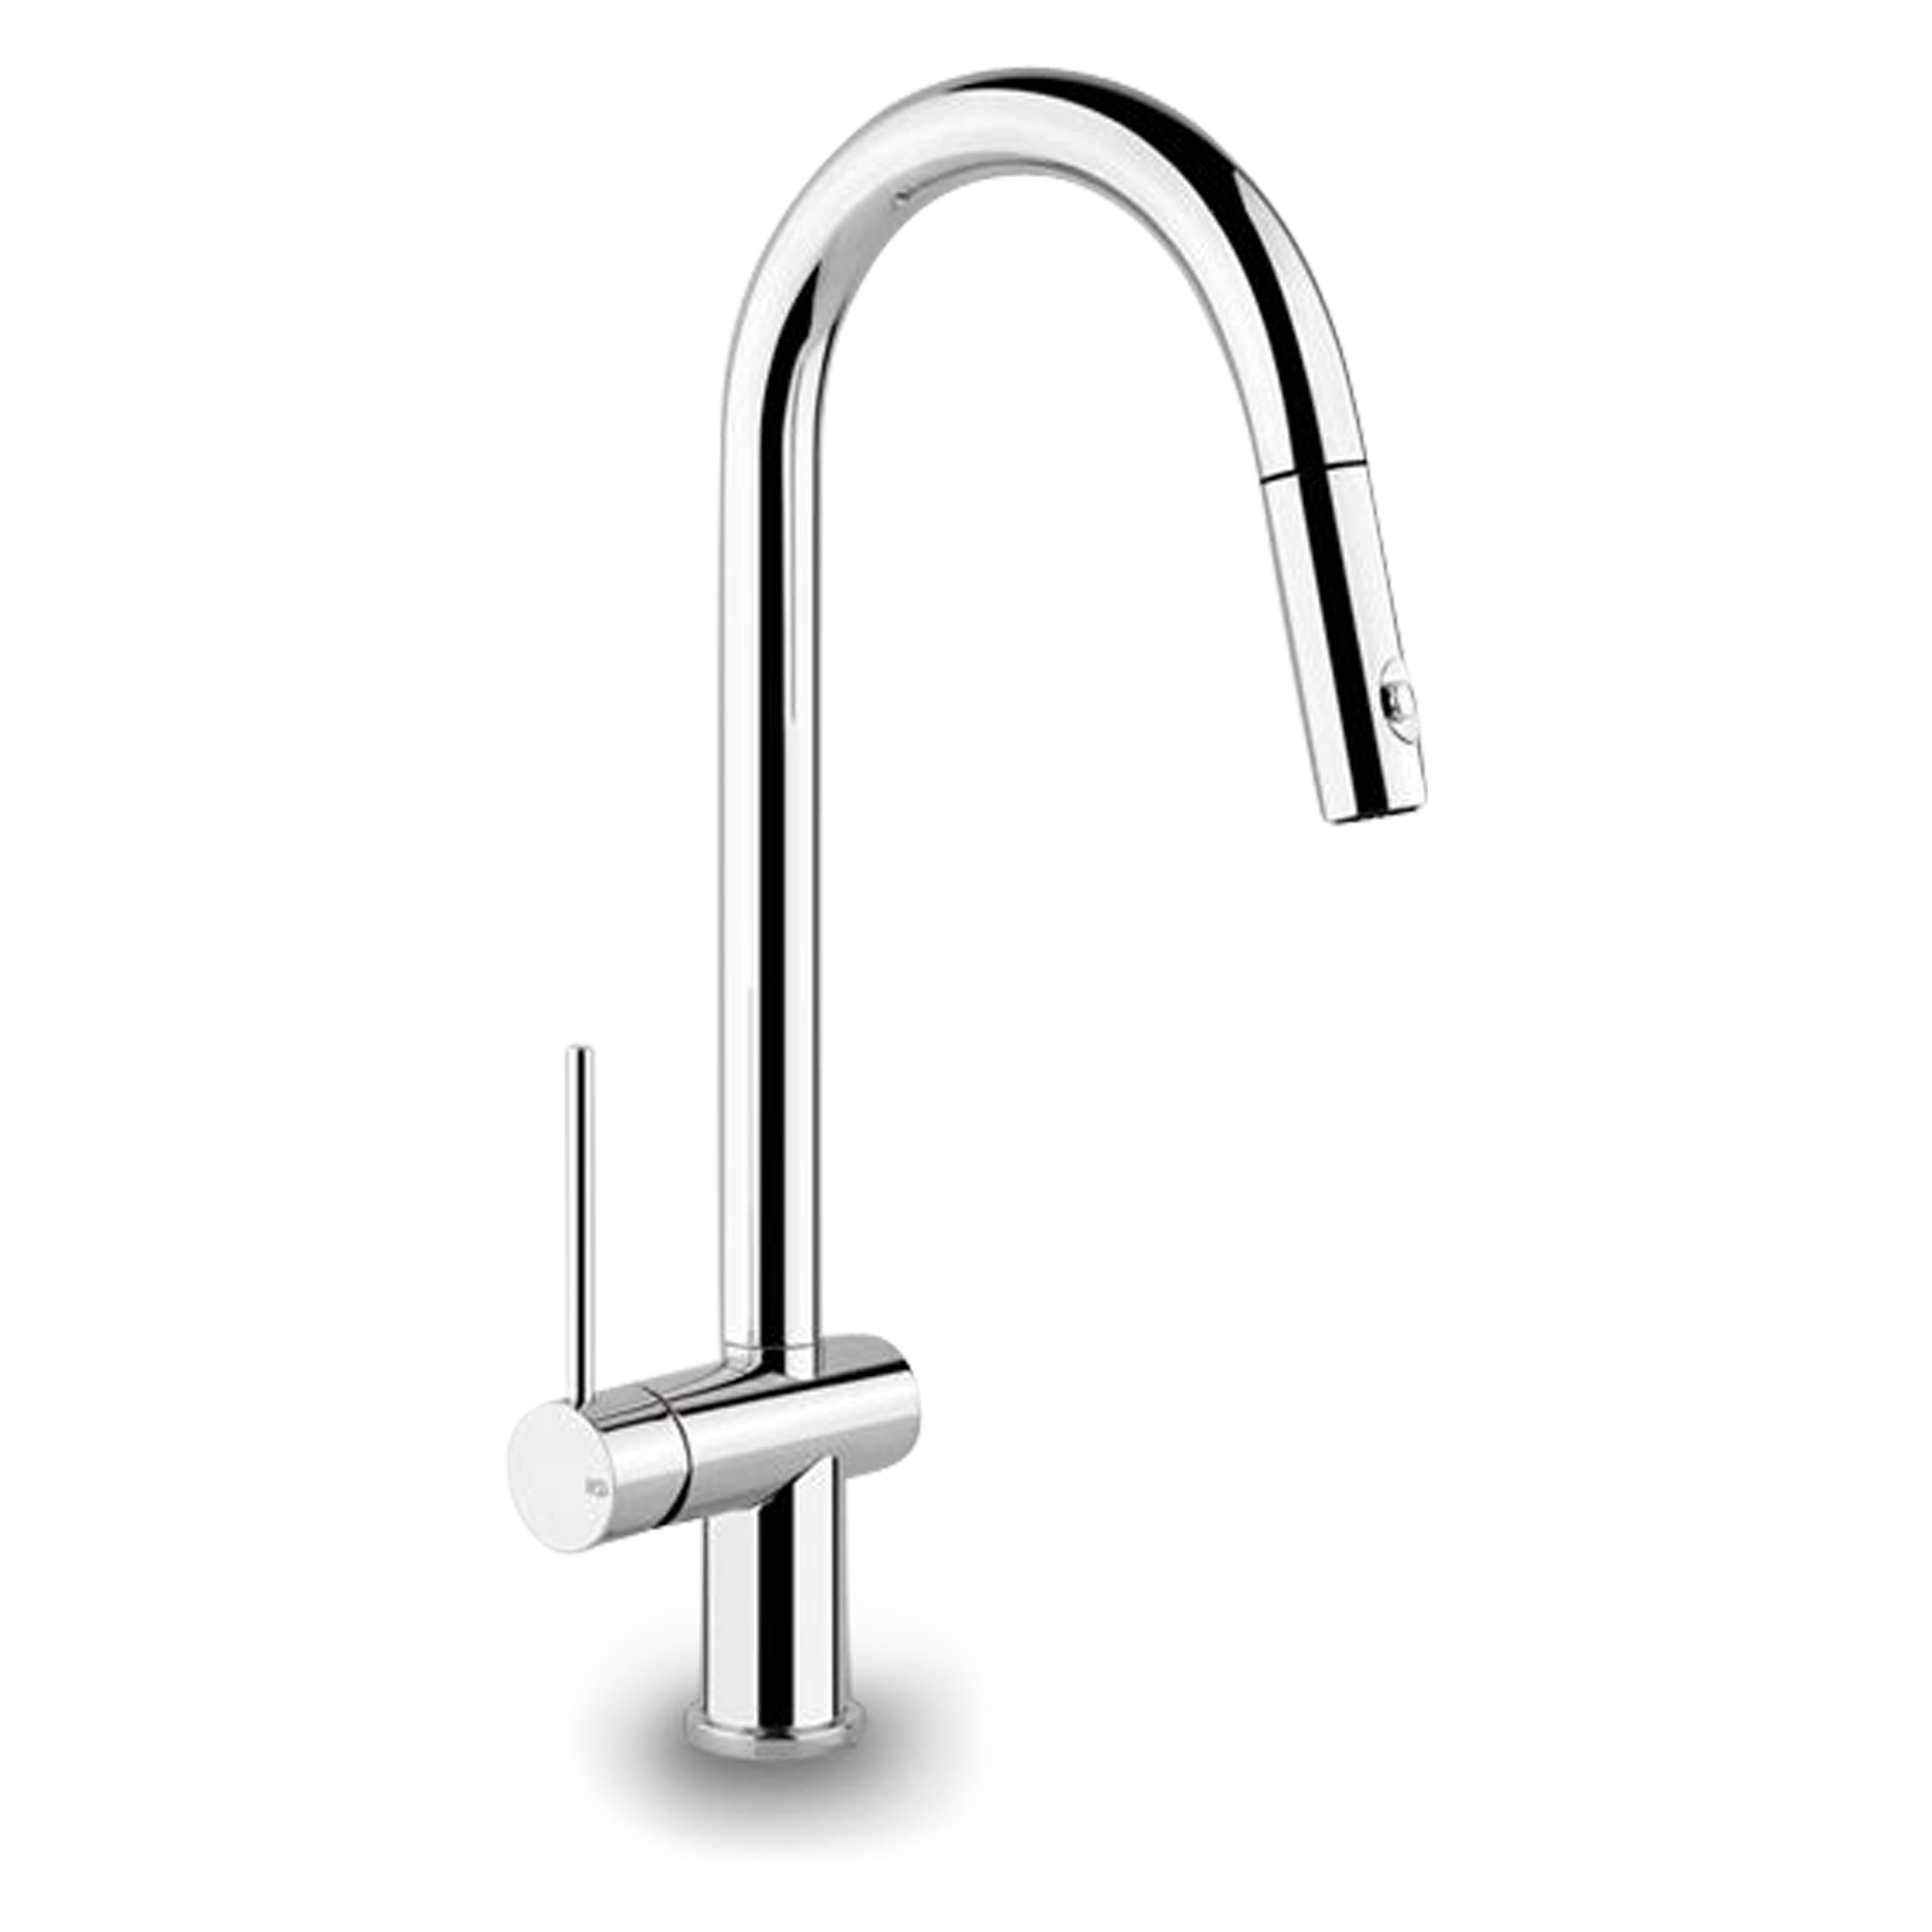 The Oxygene pull-down sink faucet adds a modern touch to any kitchen with its seamless lines and arched cylindrical shape.